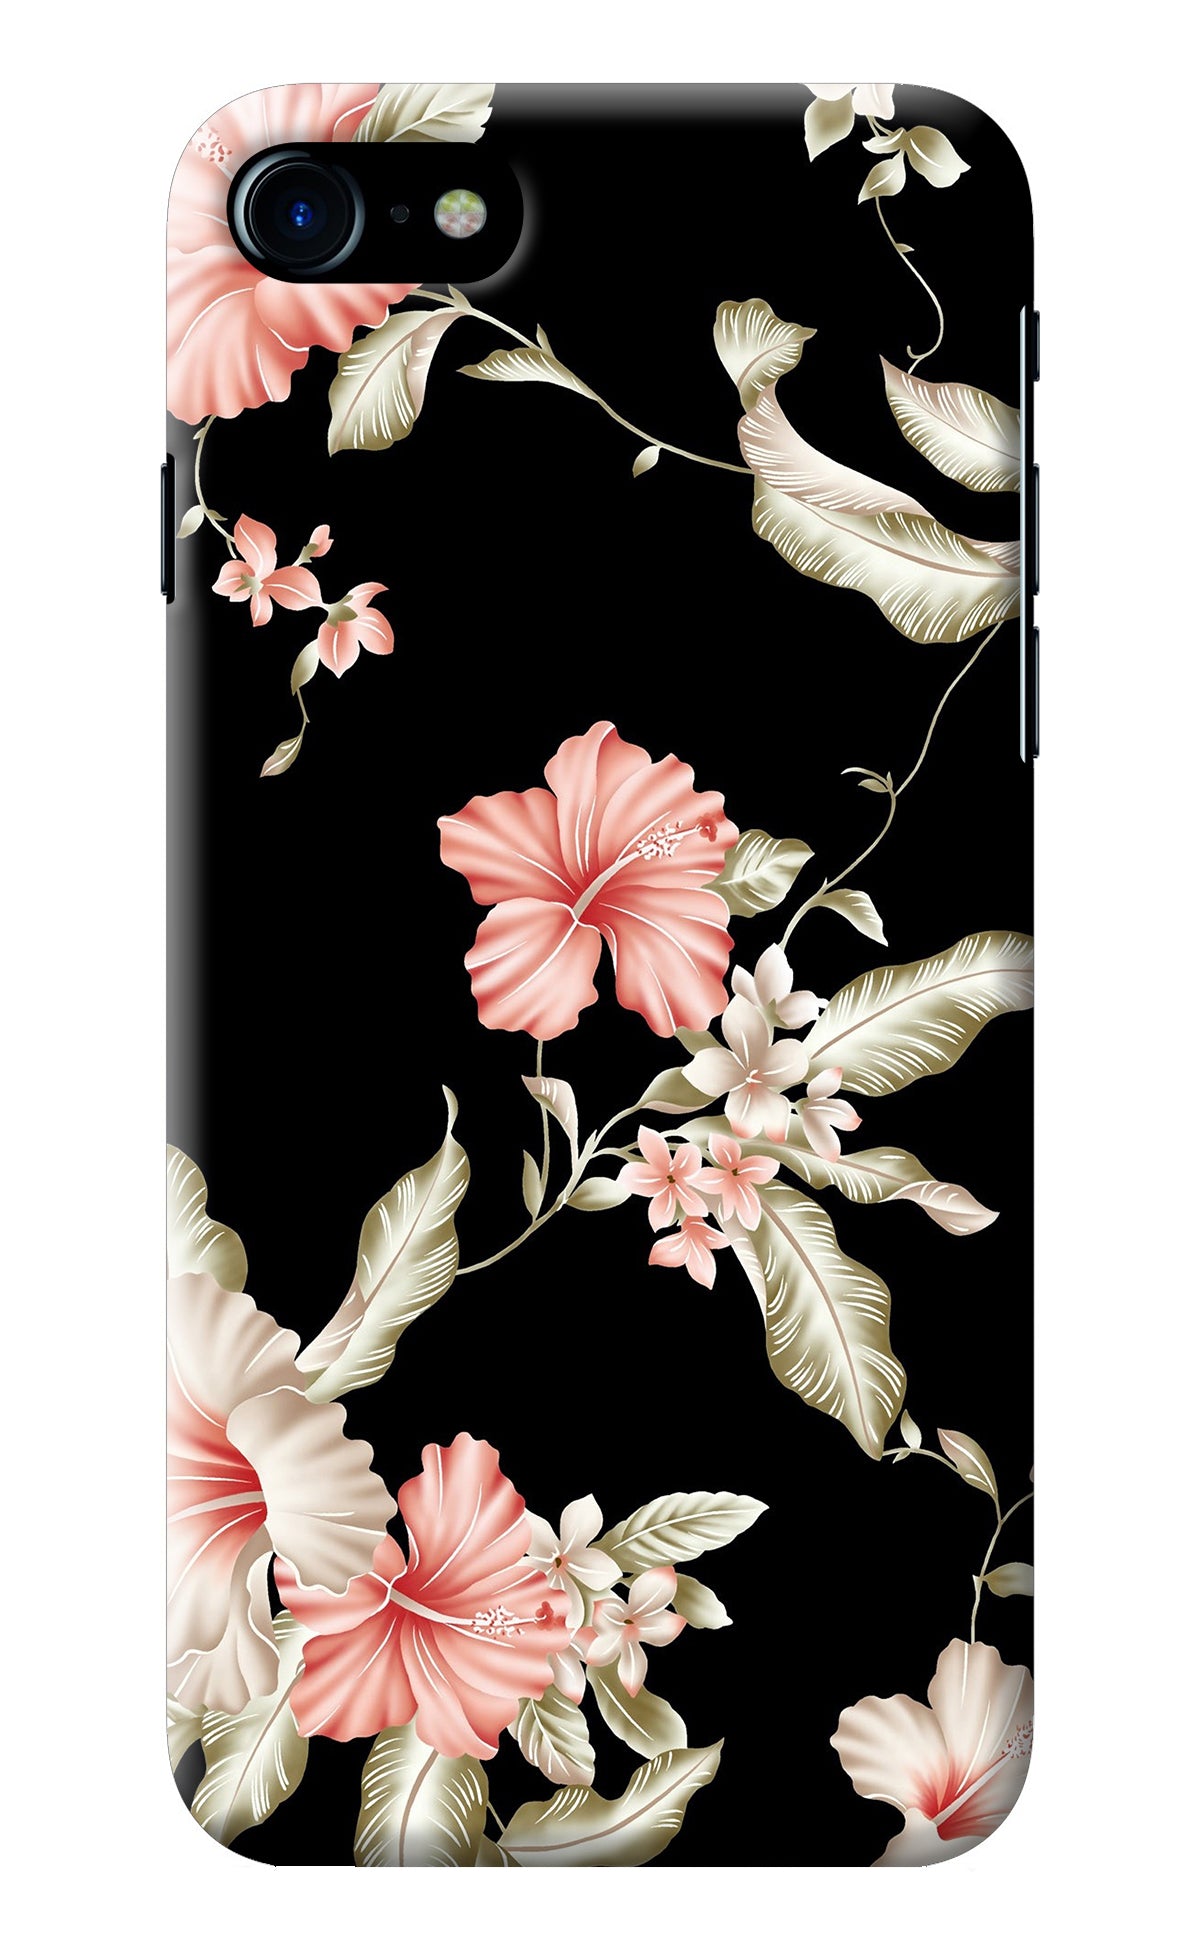 Flowers iPhone 7/7s Back Cover